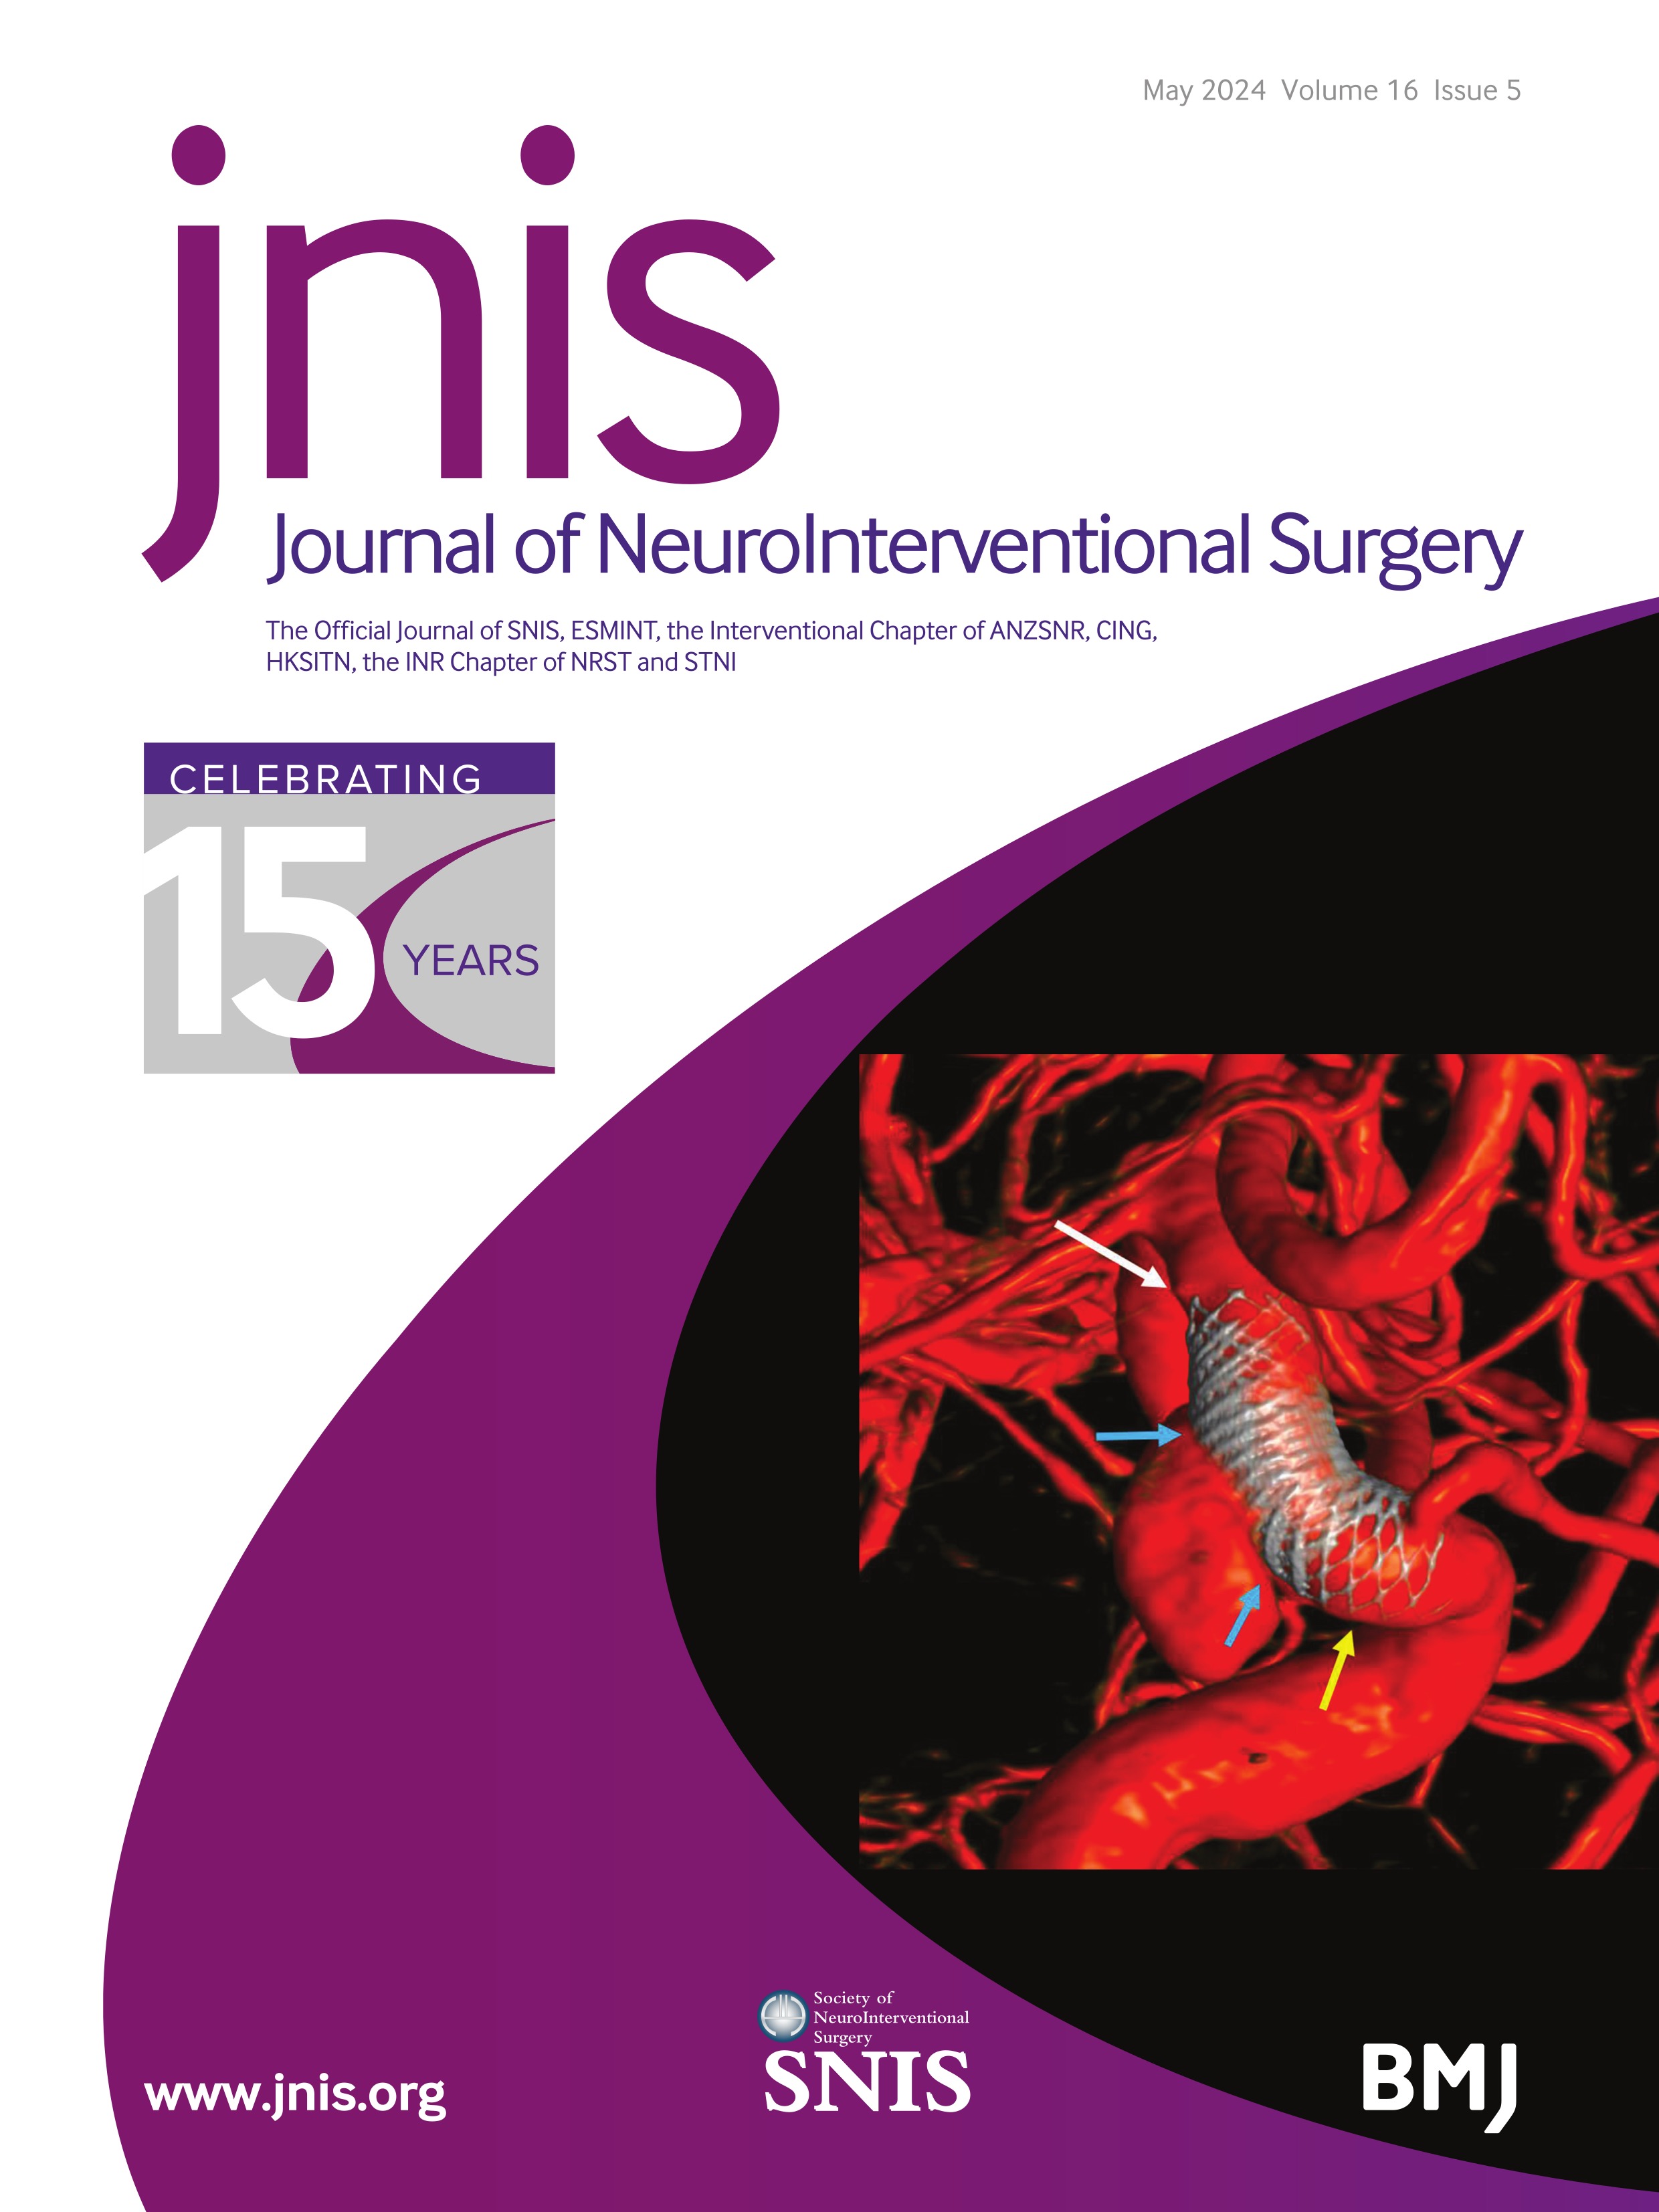 Predictors of aneurysm occlusion after treatment with flow diverters: a systematic literature review